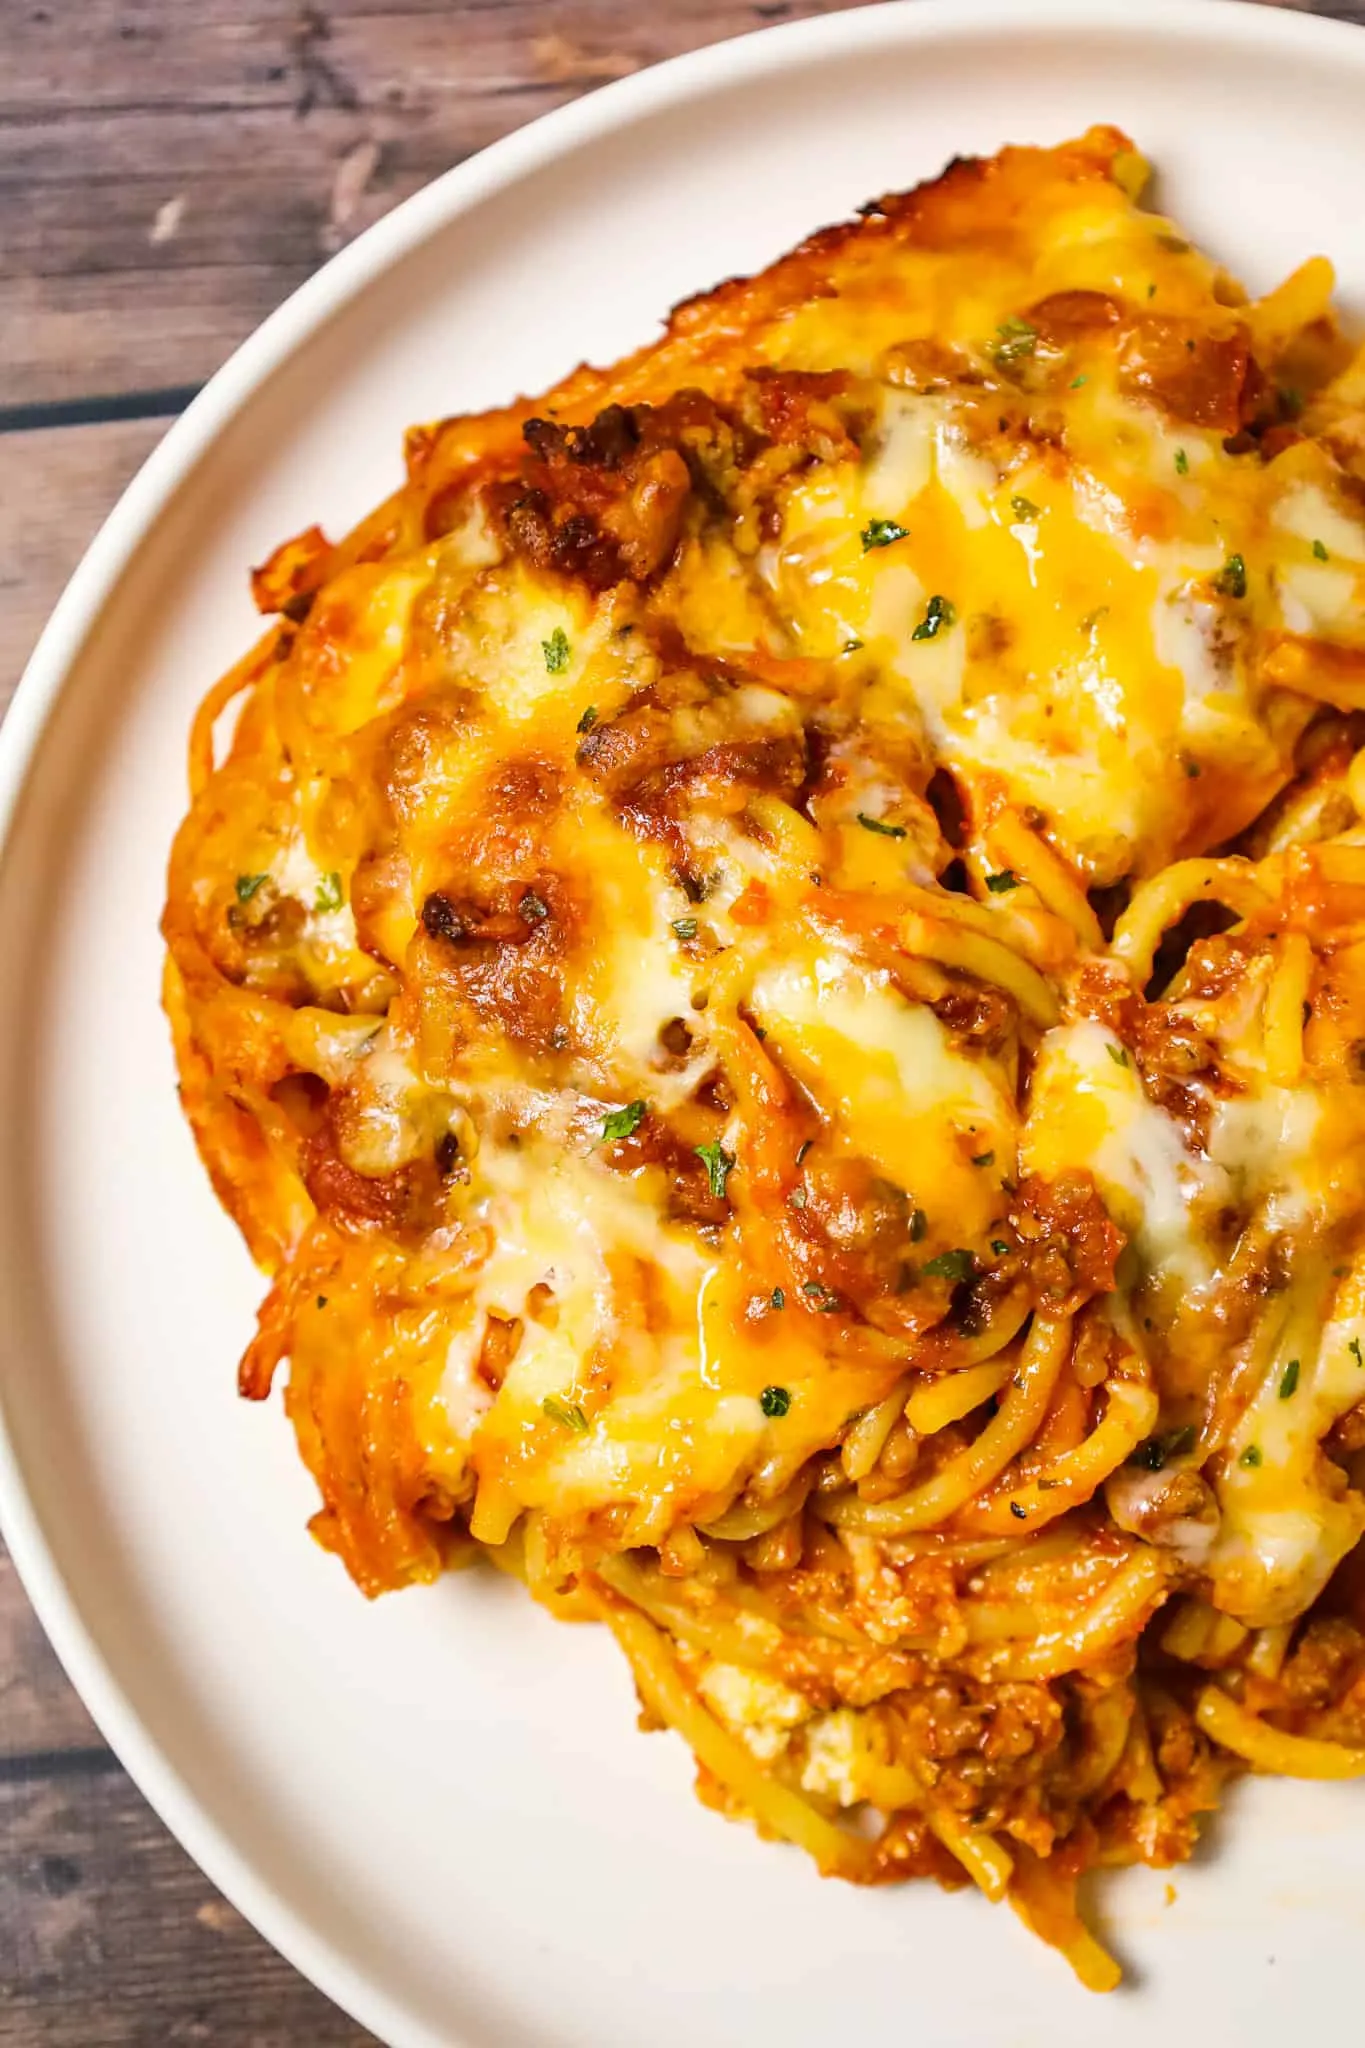 Southern Baked Spaghetti is a hearty baked pasta recipe loaded with ground beef, marinara, ricotta, parmesan, cheddar and mozzarella cheese.